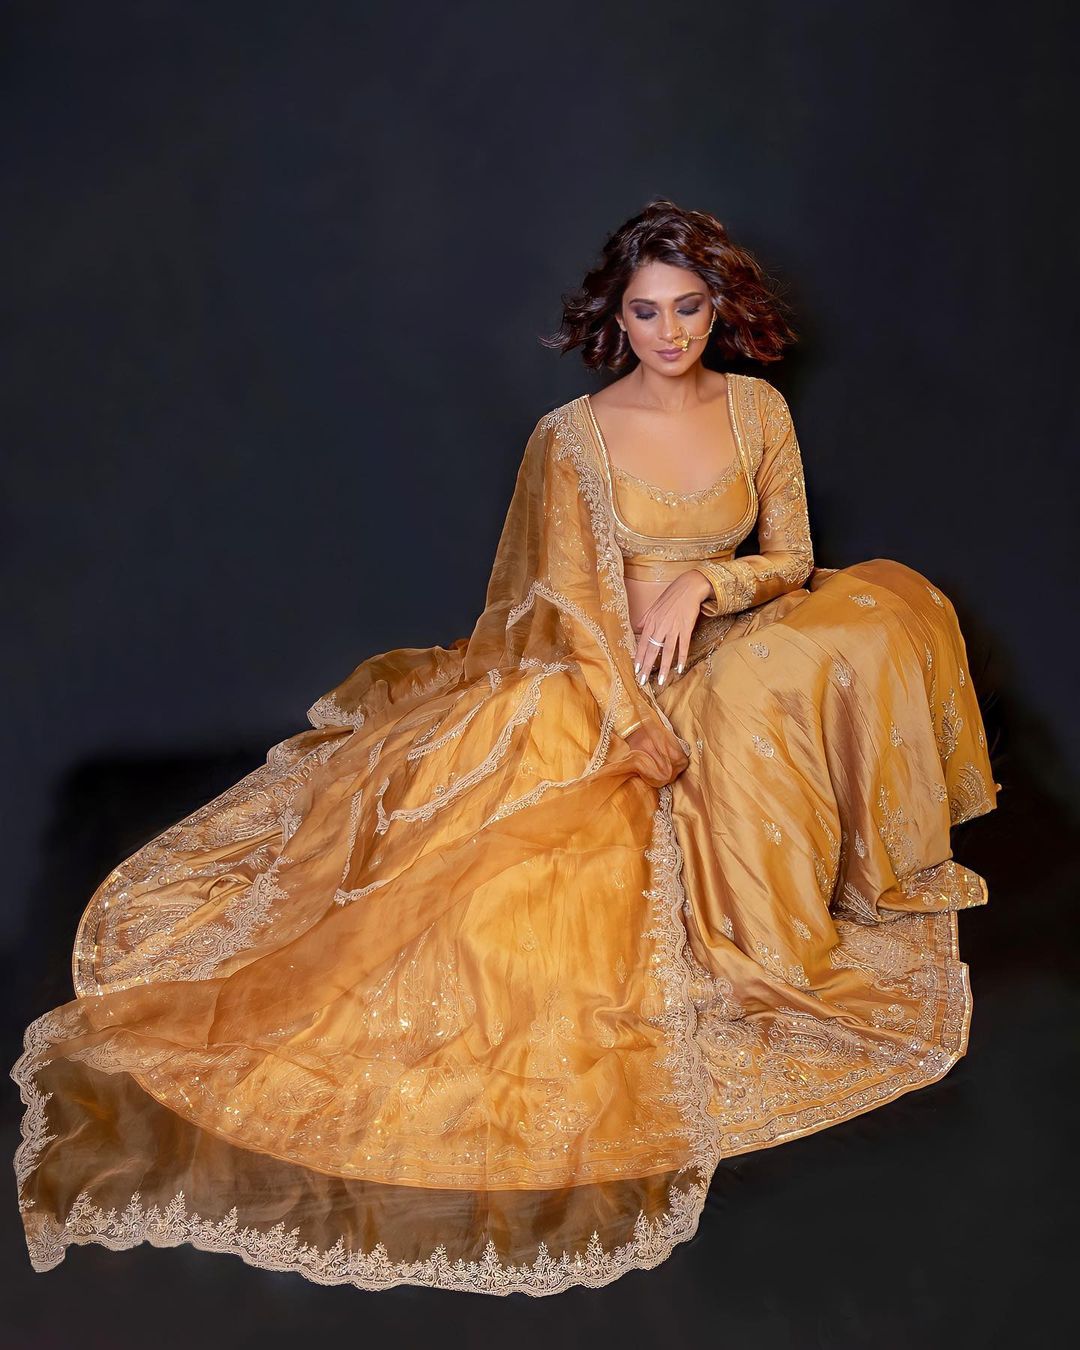 Jennifer Winget captures the fairytale feels in these exquisite lehengas